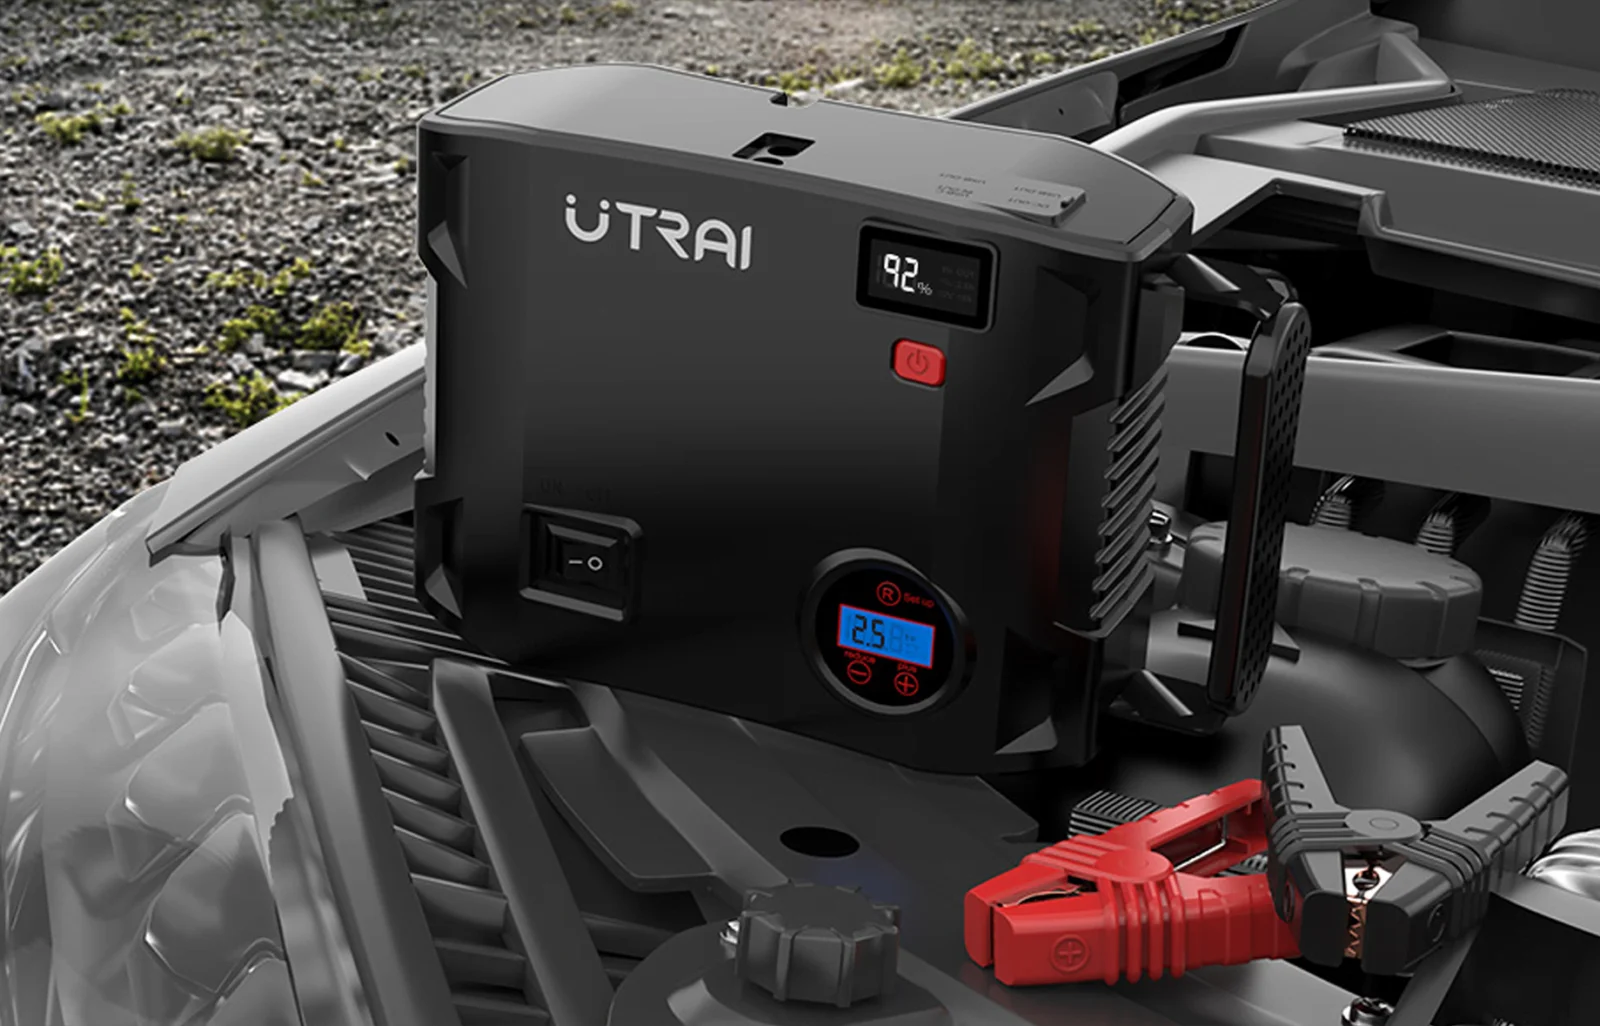 Utrai Jstar 5 Battery Charger With Air Compressor – Figaros Online